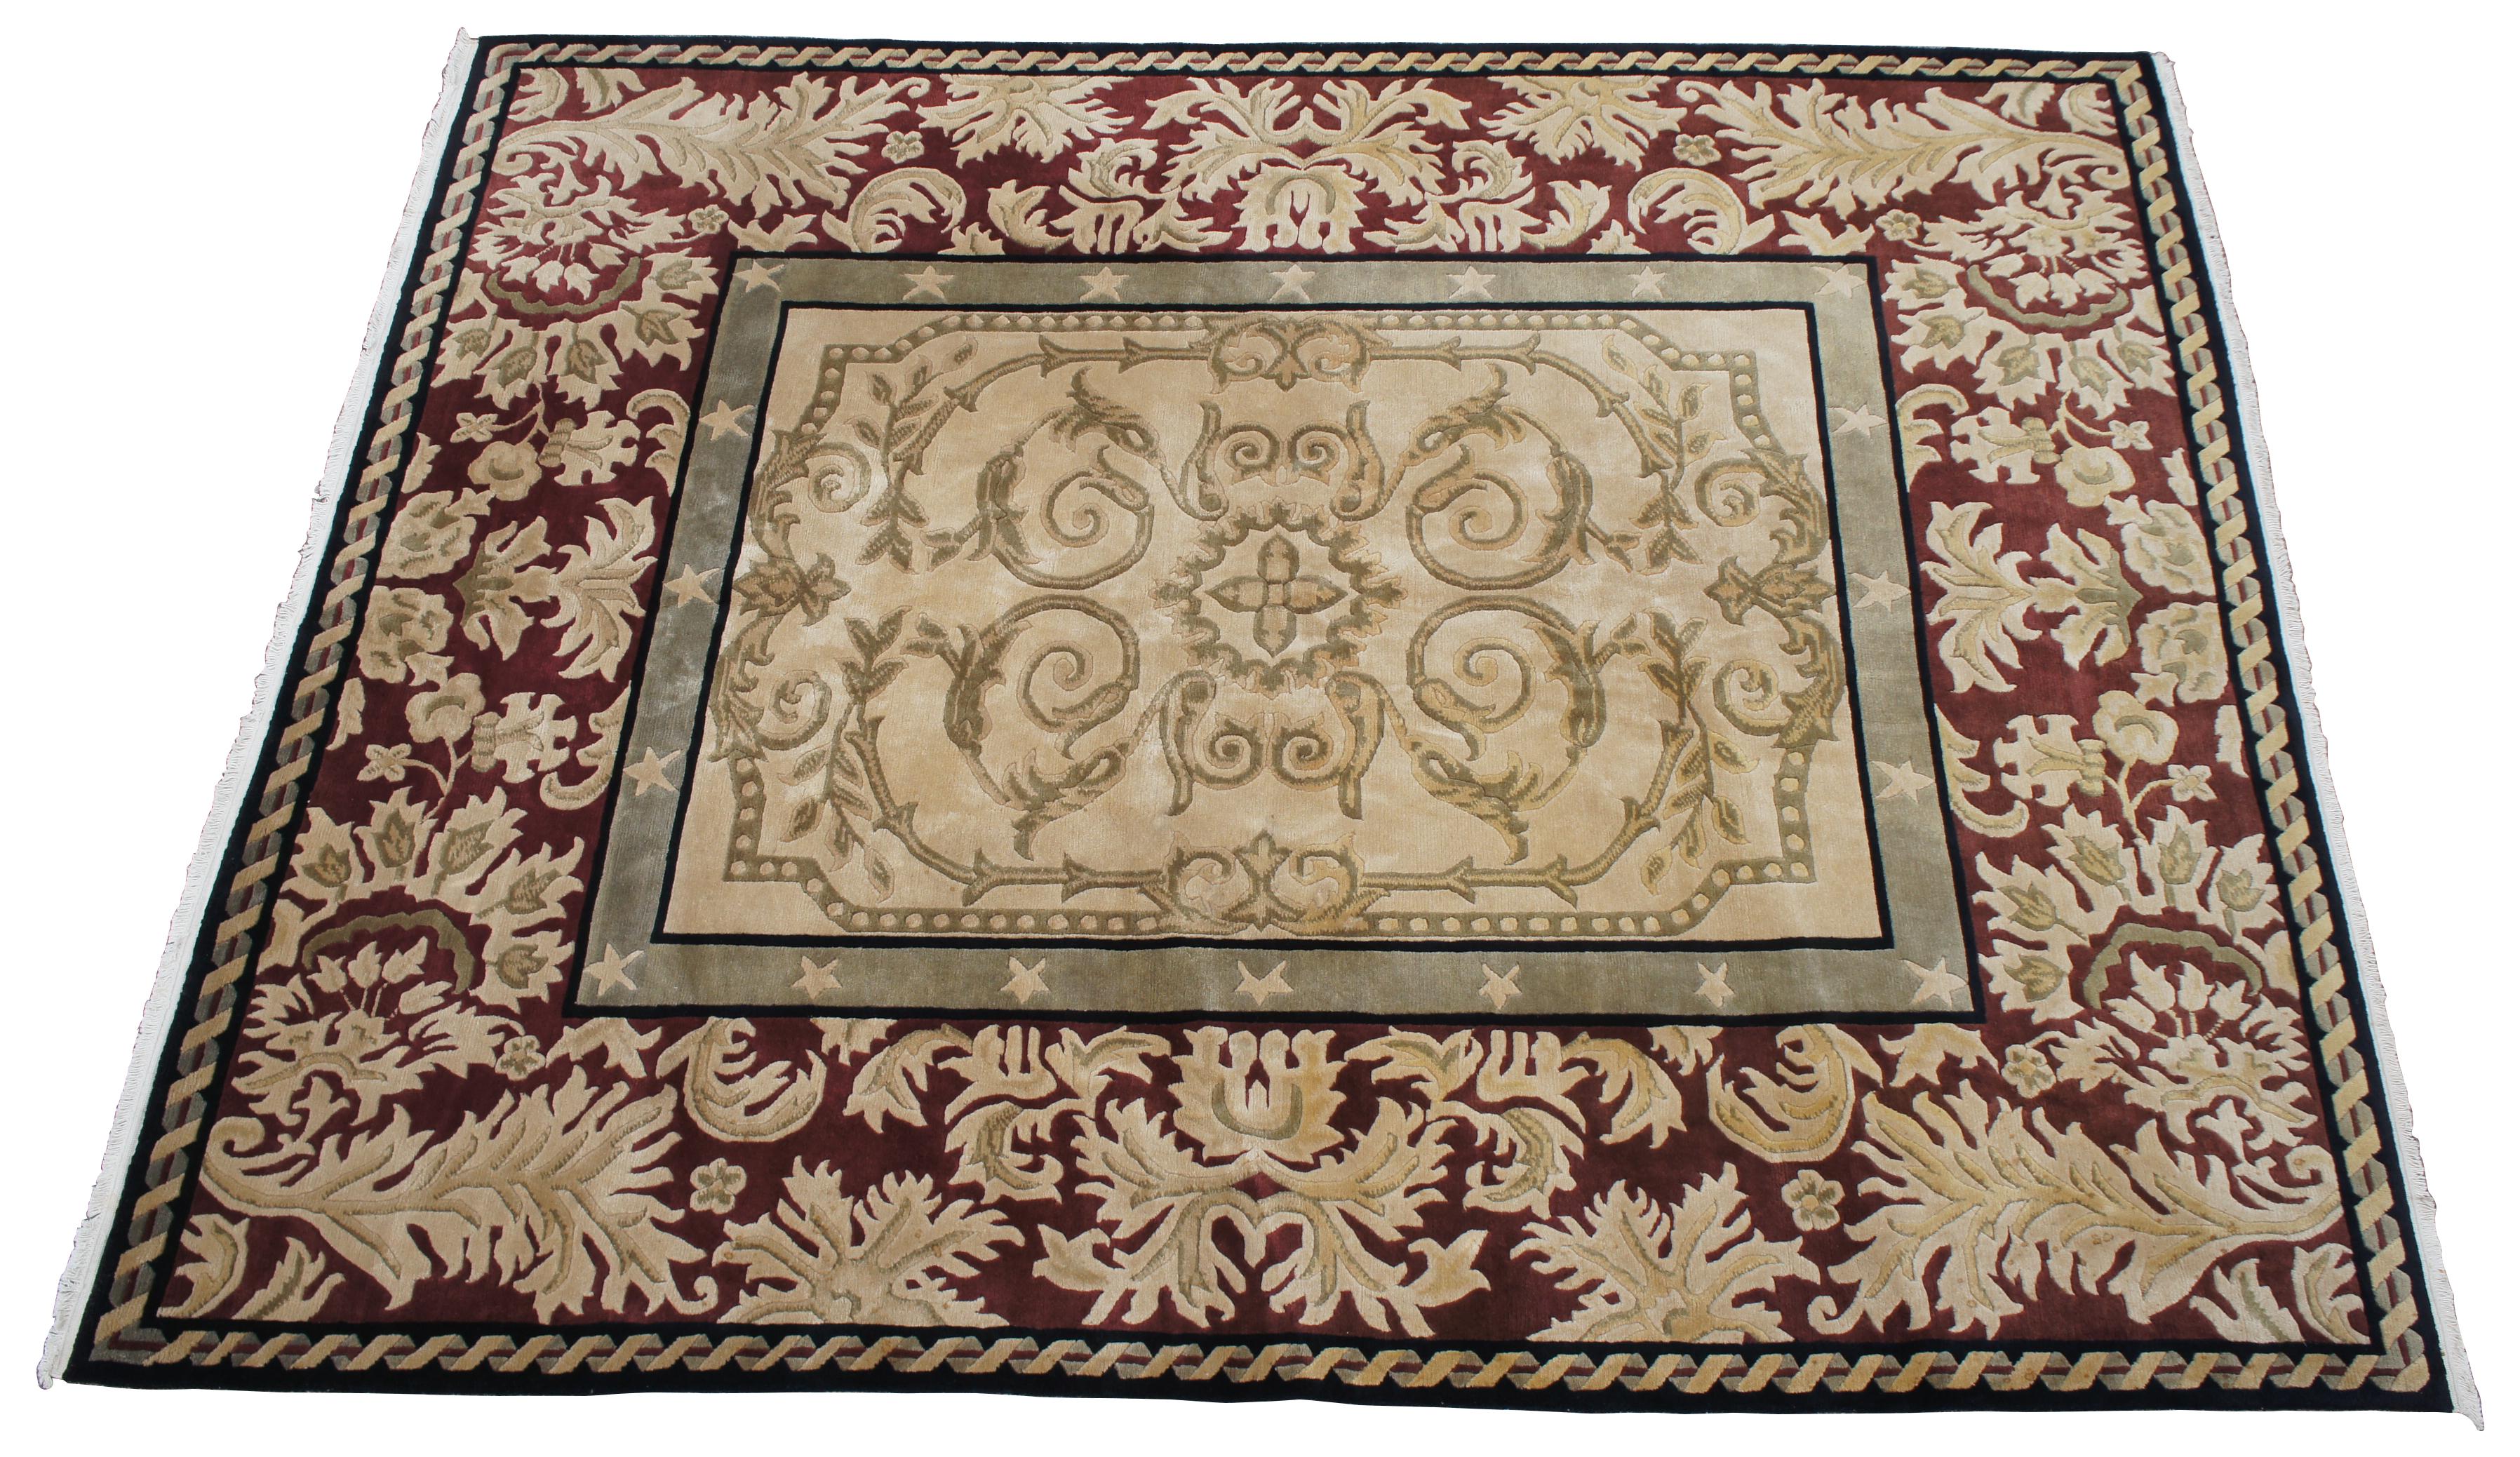 Vintage Indo Nepal Tibetan area rug. Features a rectangular medallion with stars over a red / maroon field, with beige / gold / tan, olive green and braided boarder with black accents. Measures: 8' x 10'.
      